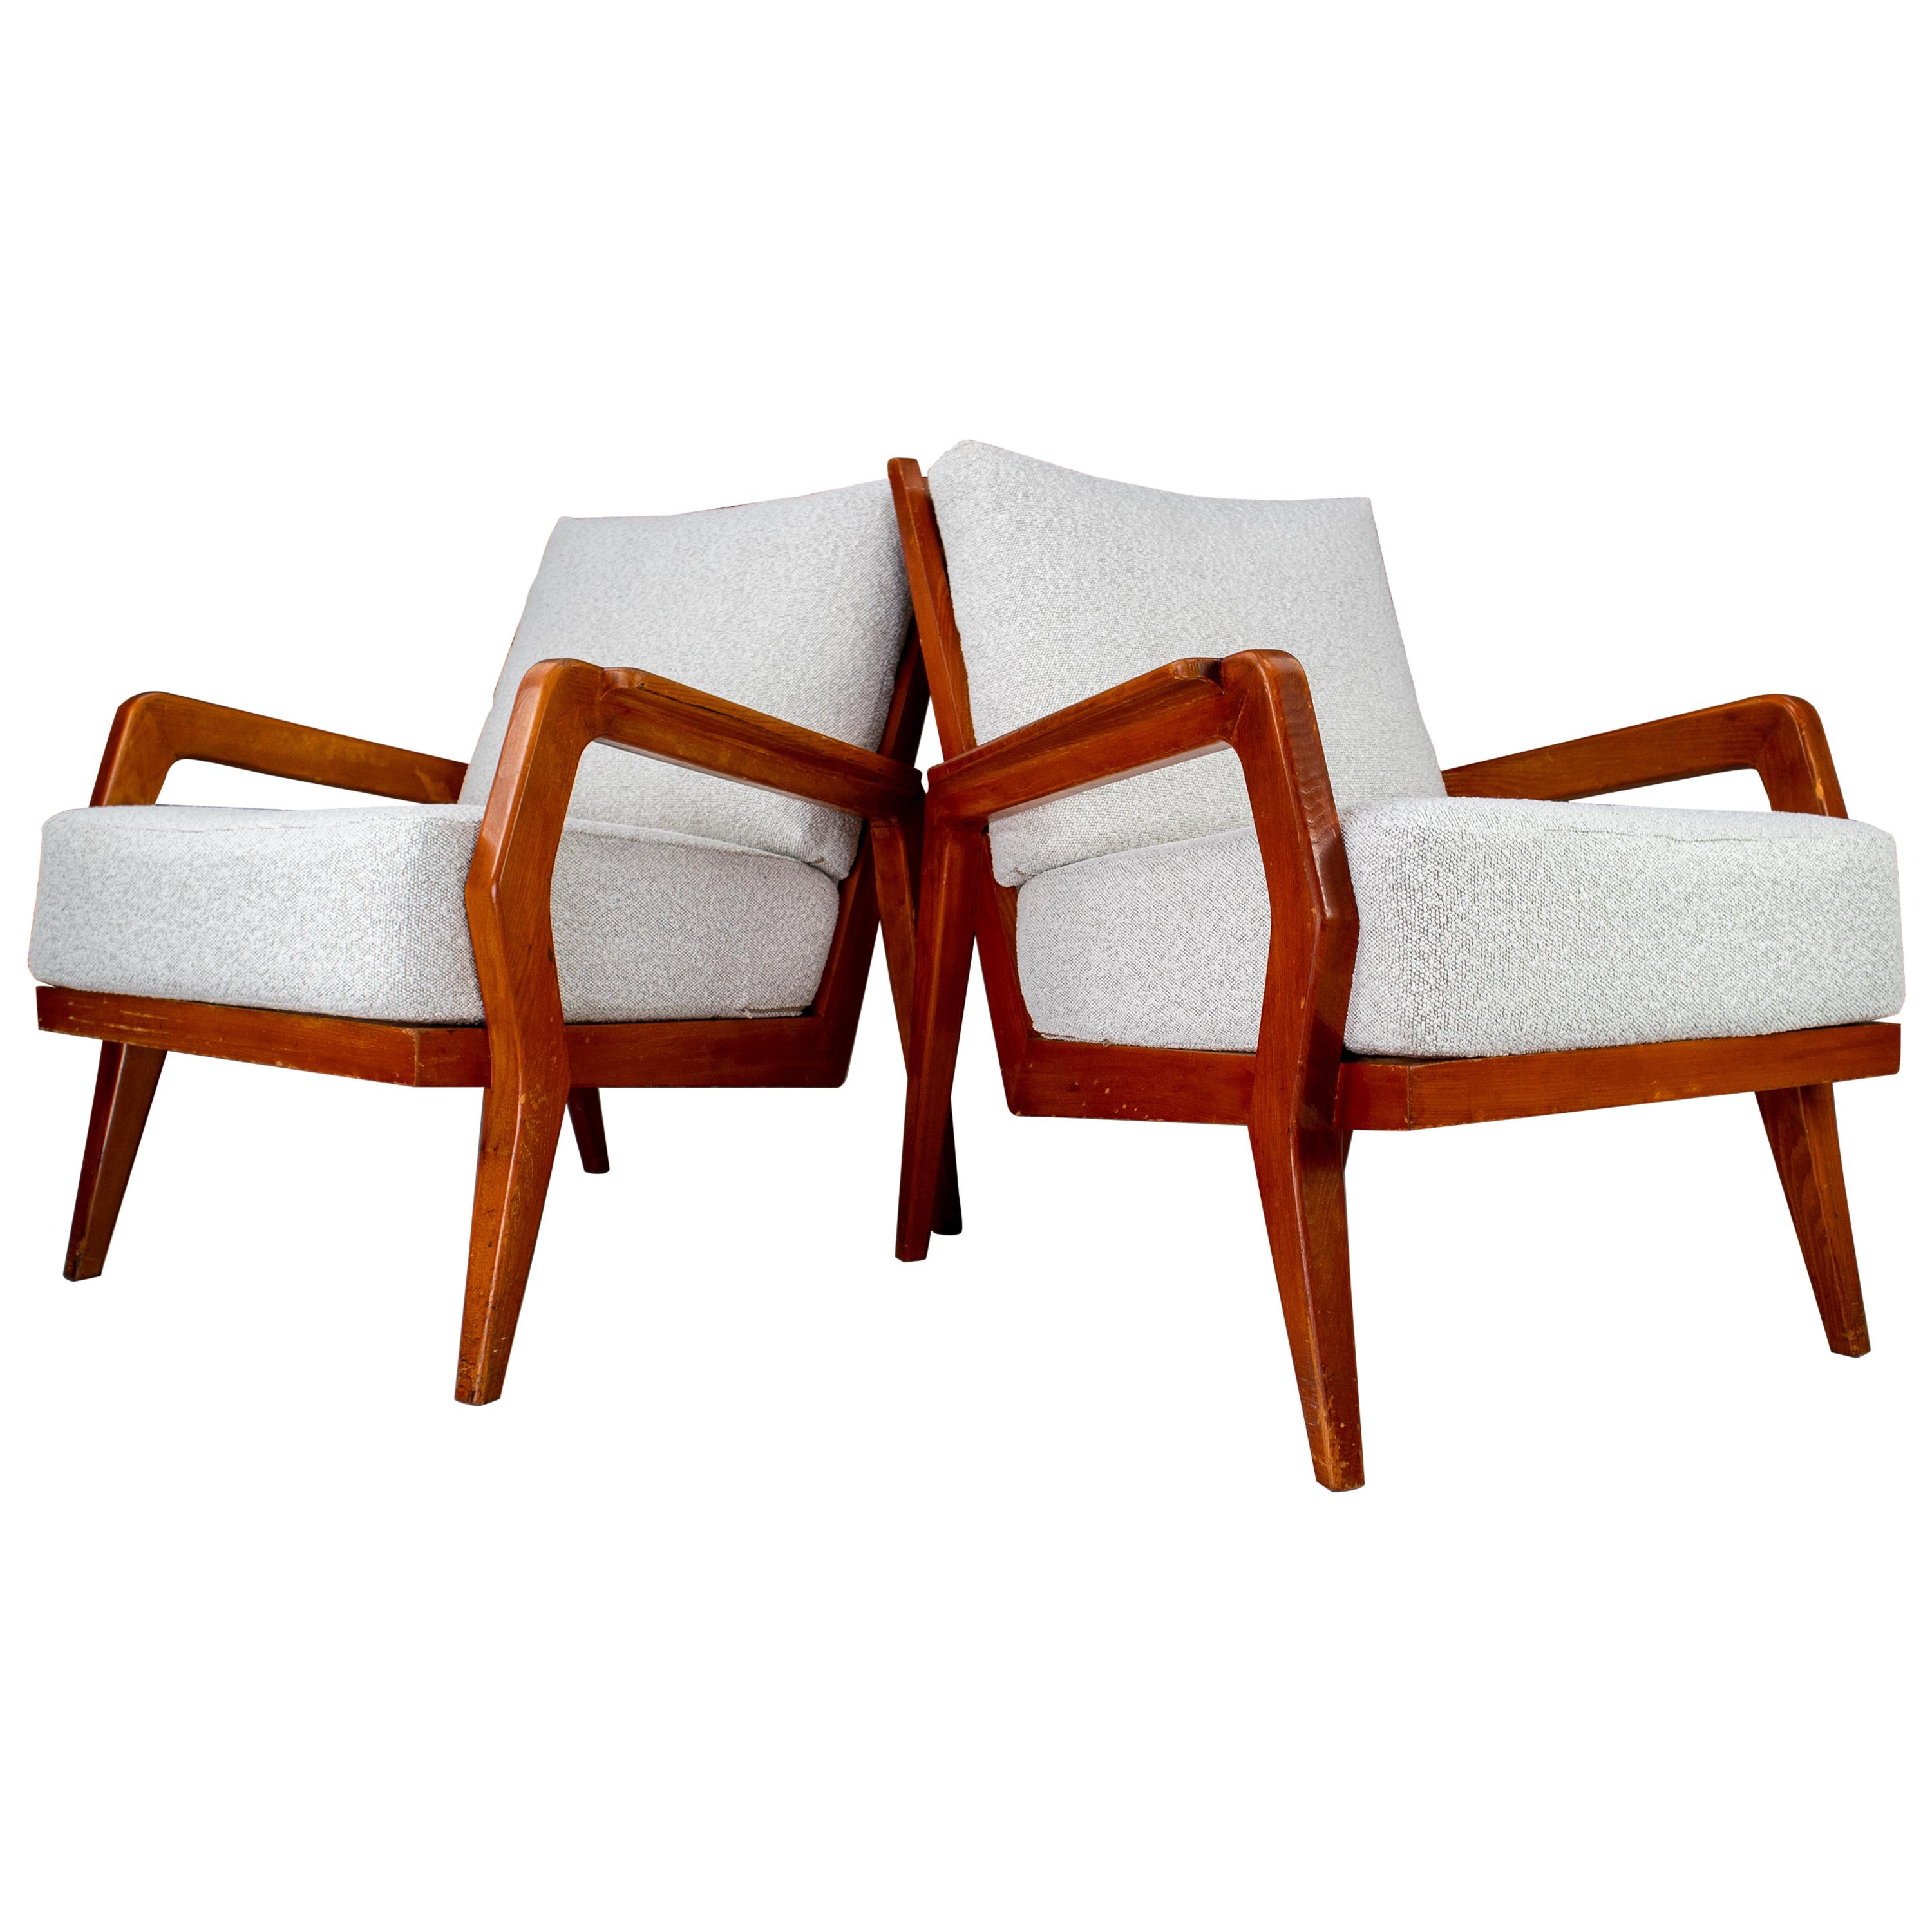 Midcentury Armchairs in Ash and Reupholstered in Boucle Fabric, France, 1950s